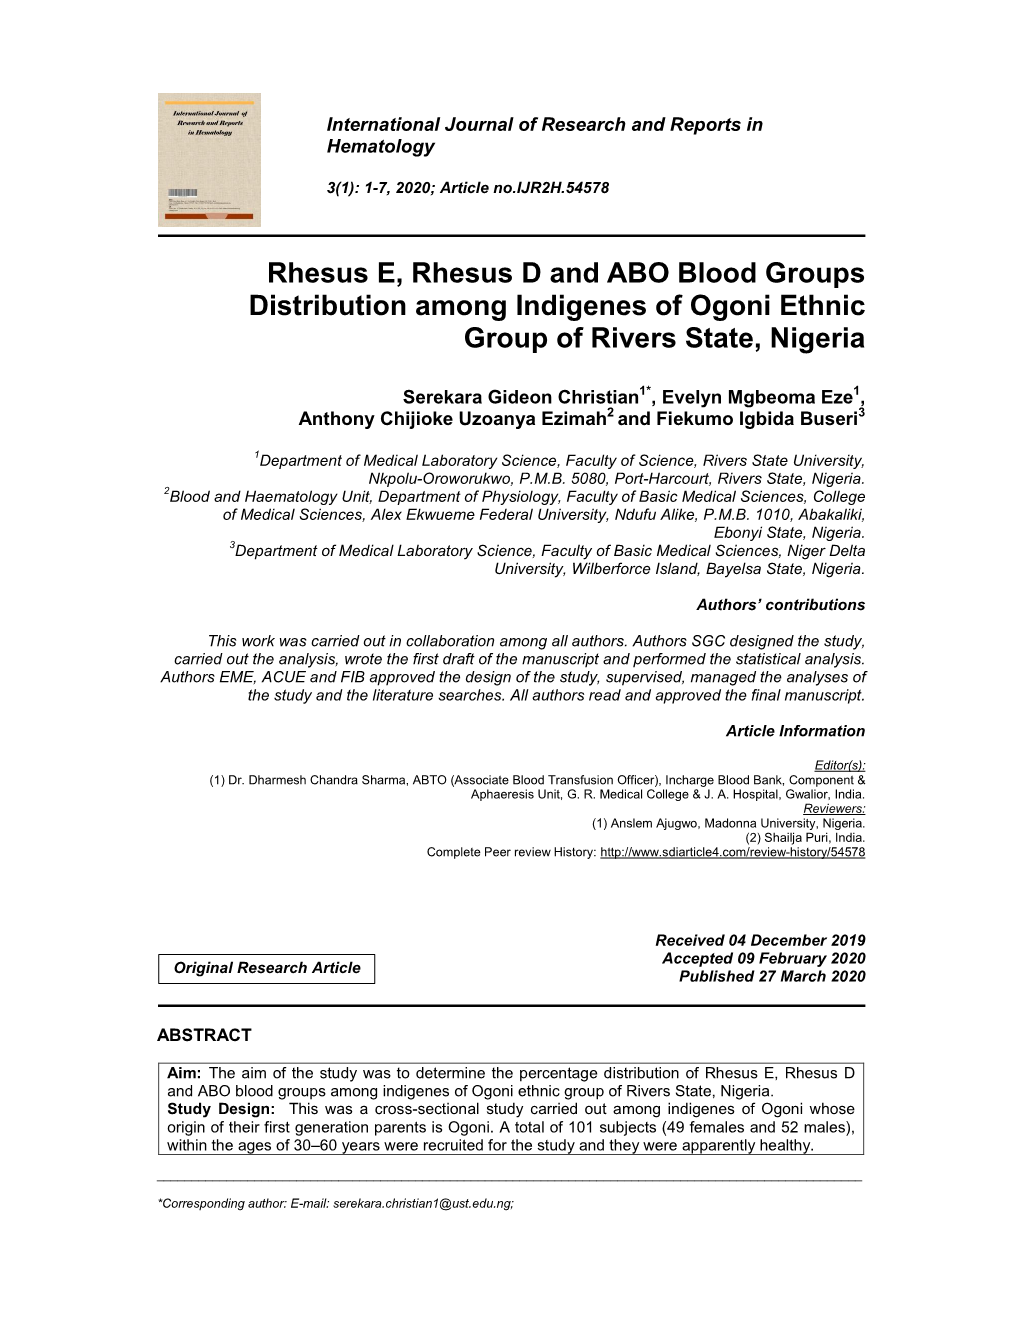 Rhesus E, Rhesus D and ABO Blood Groups Distribution Among Indigenes of Ogoni Ethnic Group of Rivers State, Nigeria